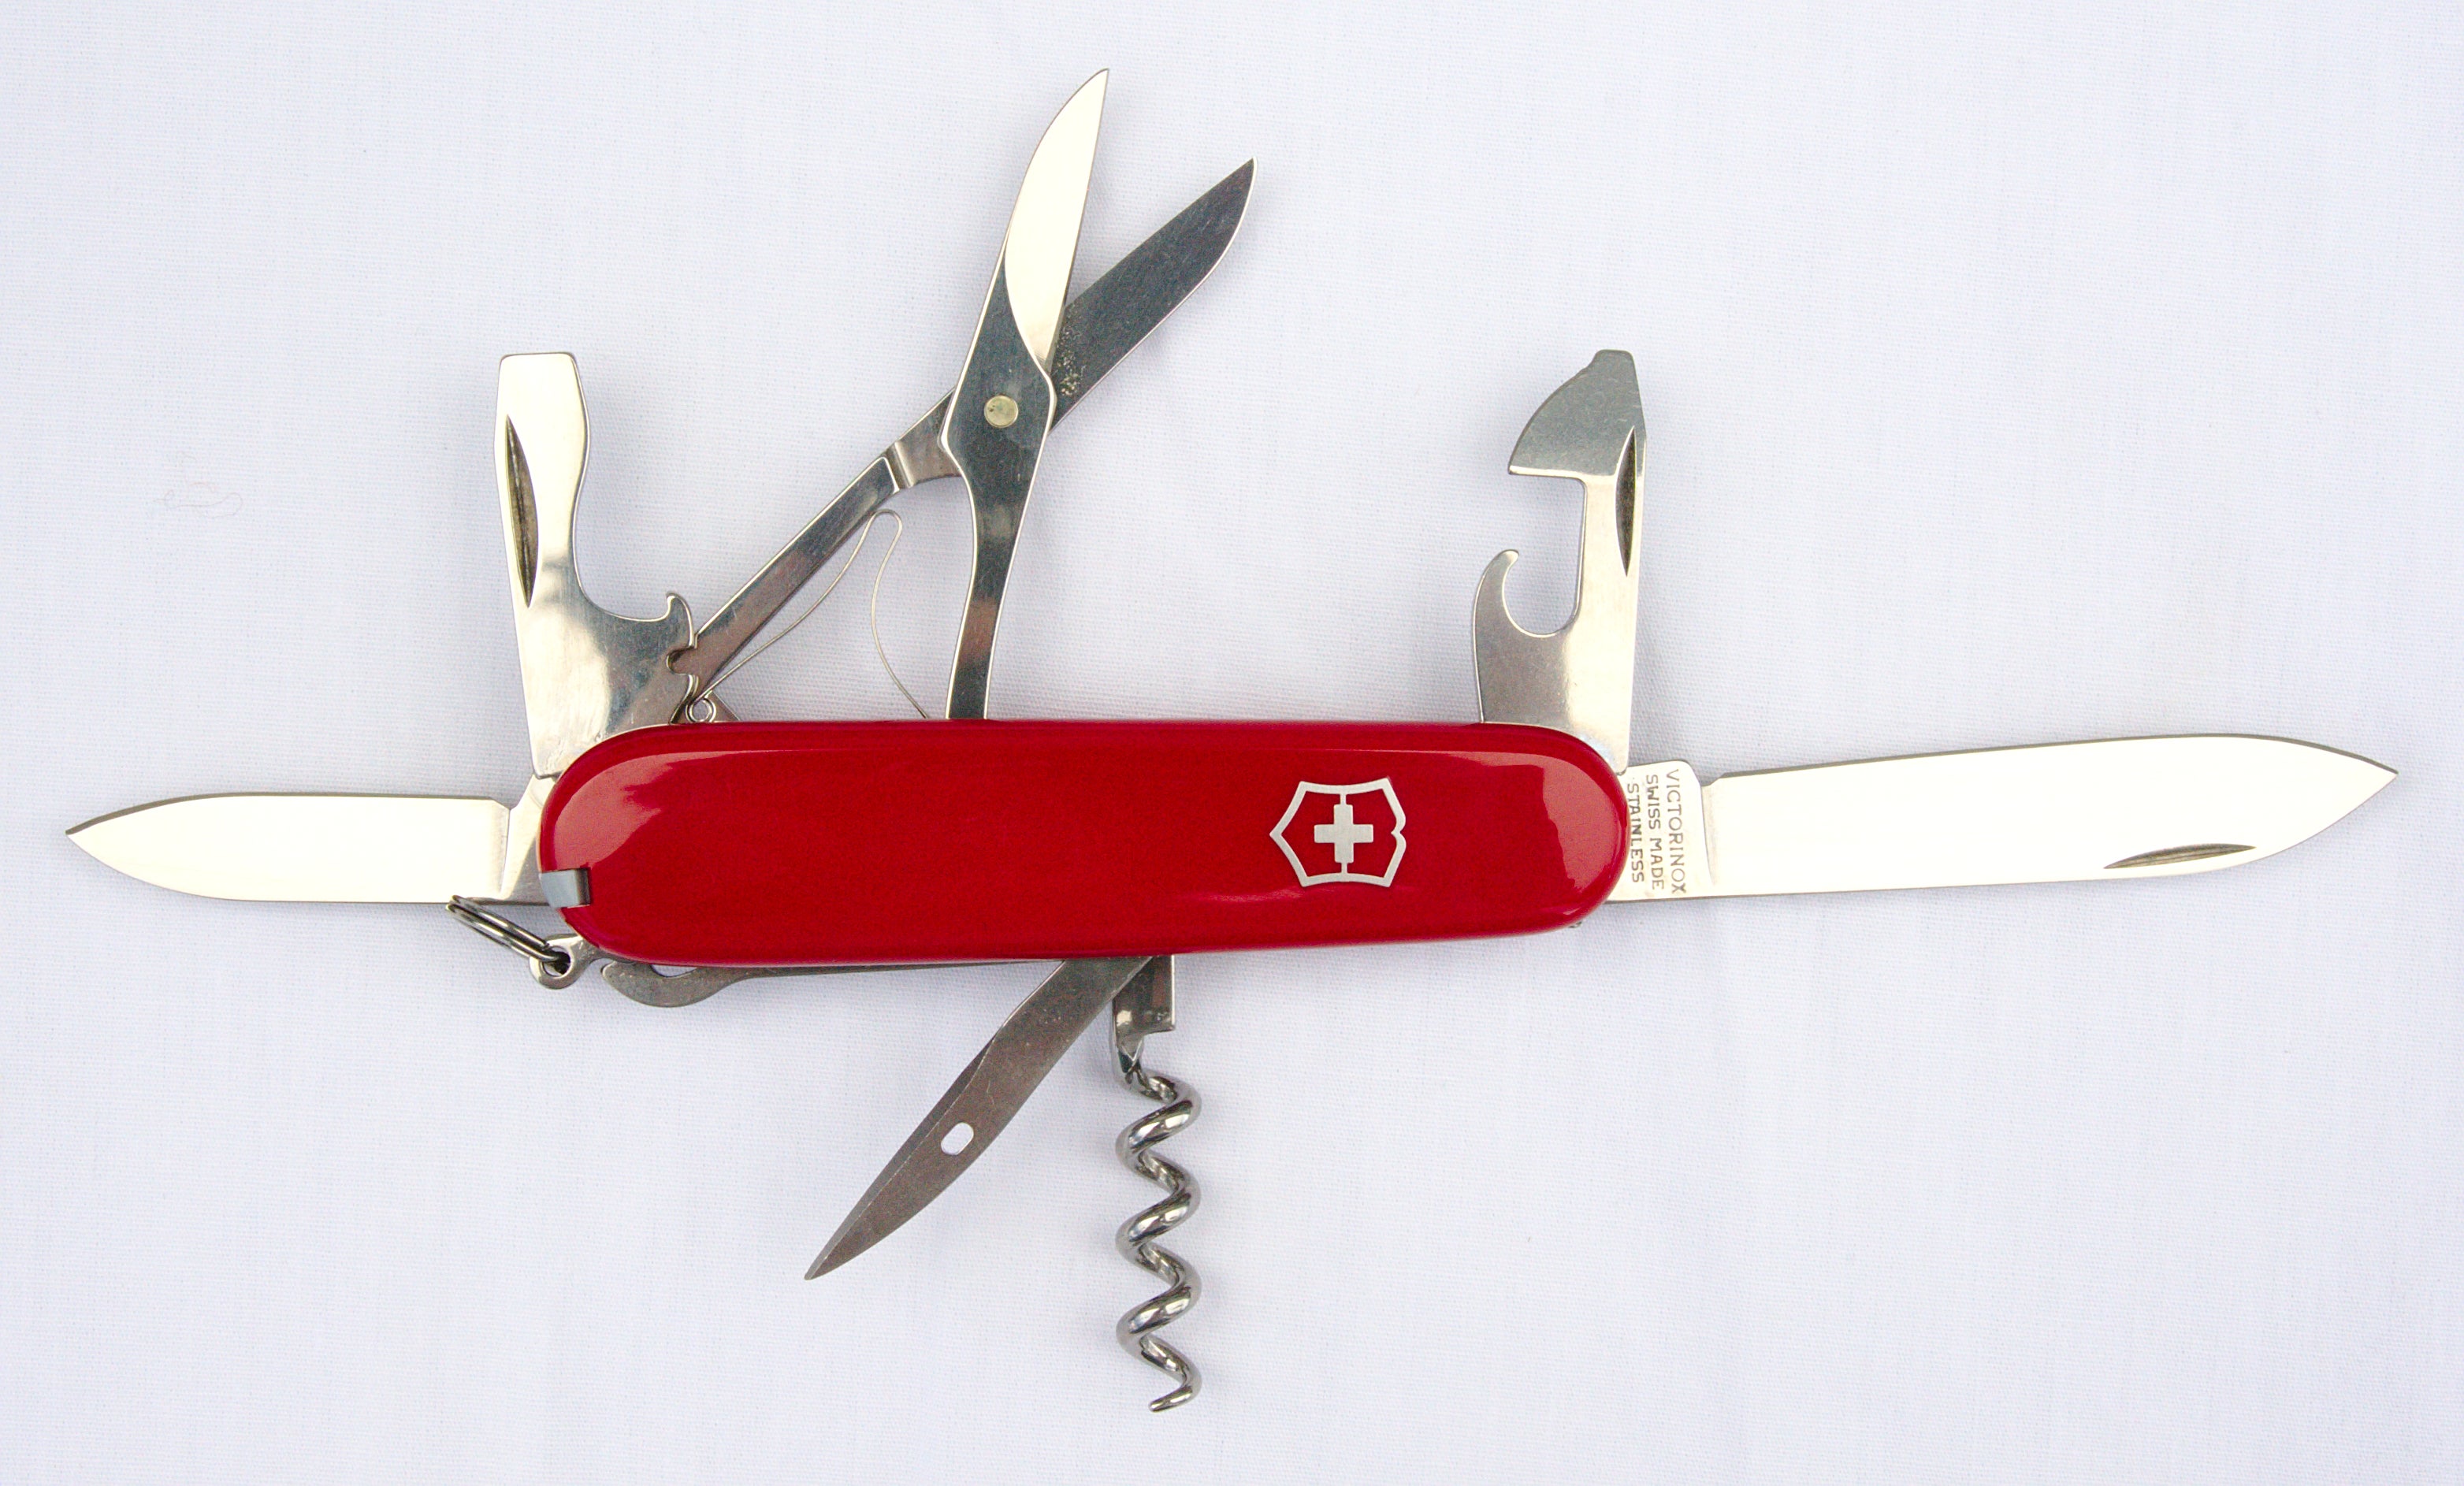 Swiss army knife, expanded to show its many included tools